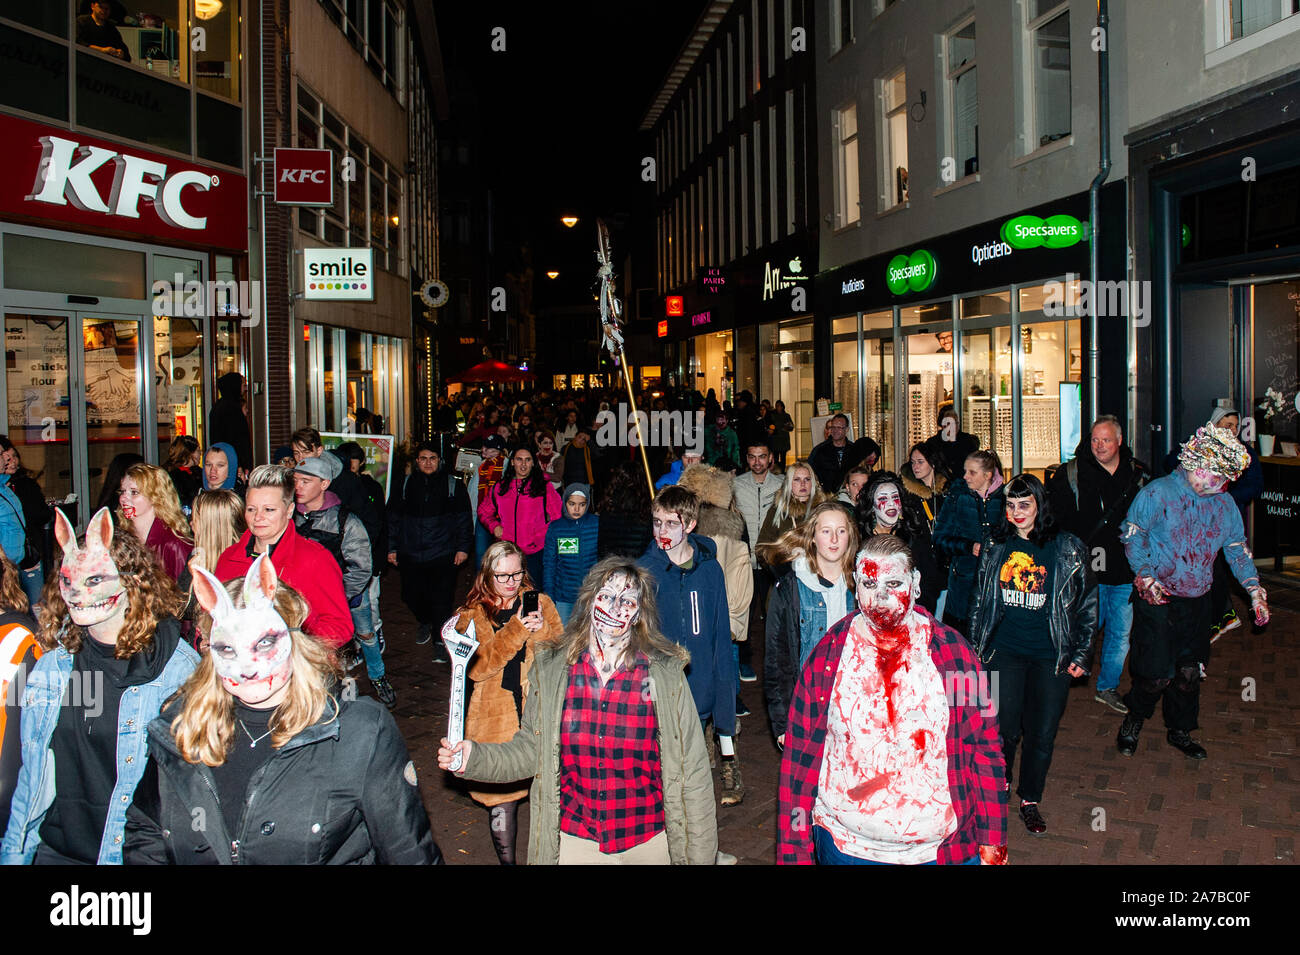 Forbedring falanks Forbigående Arnhem, Netherlands. 31st Oct, 2019. zombies are seen walking on the  streets.As in previous years, the Zombie Walk took place around the center  of Arnhem. The walk started at the live music